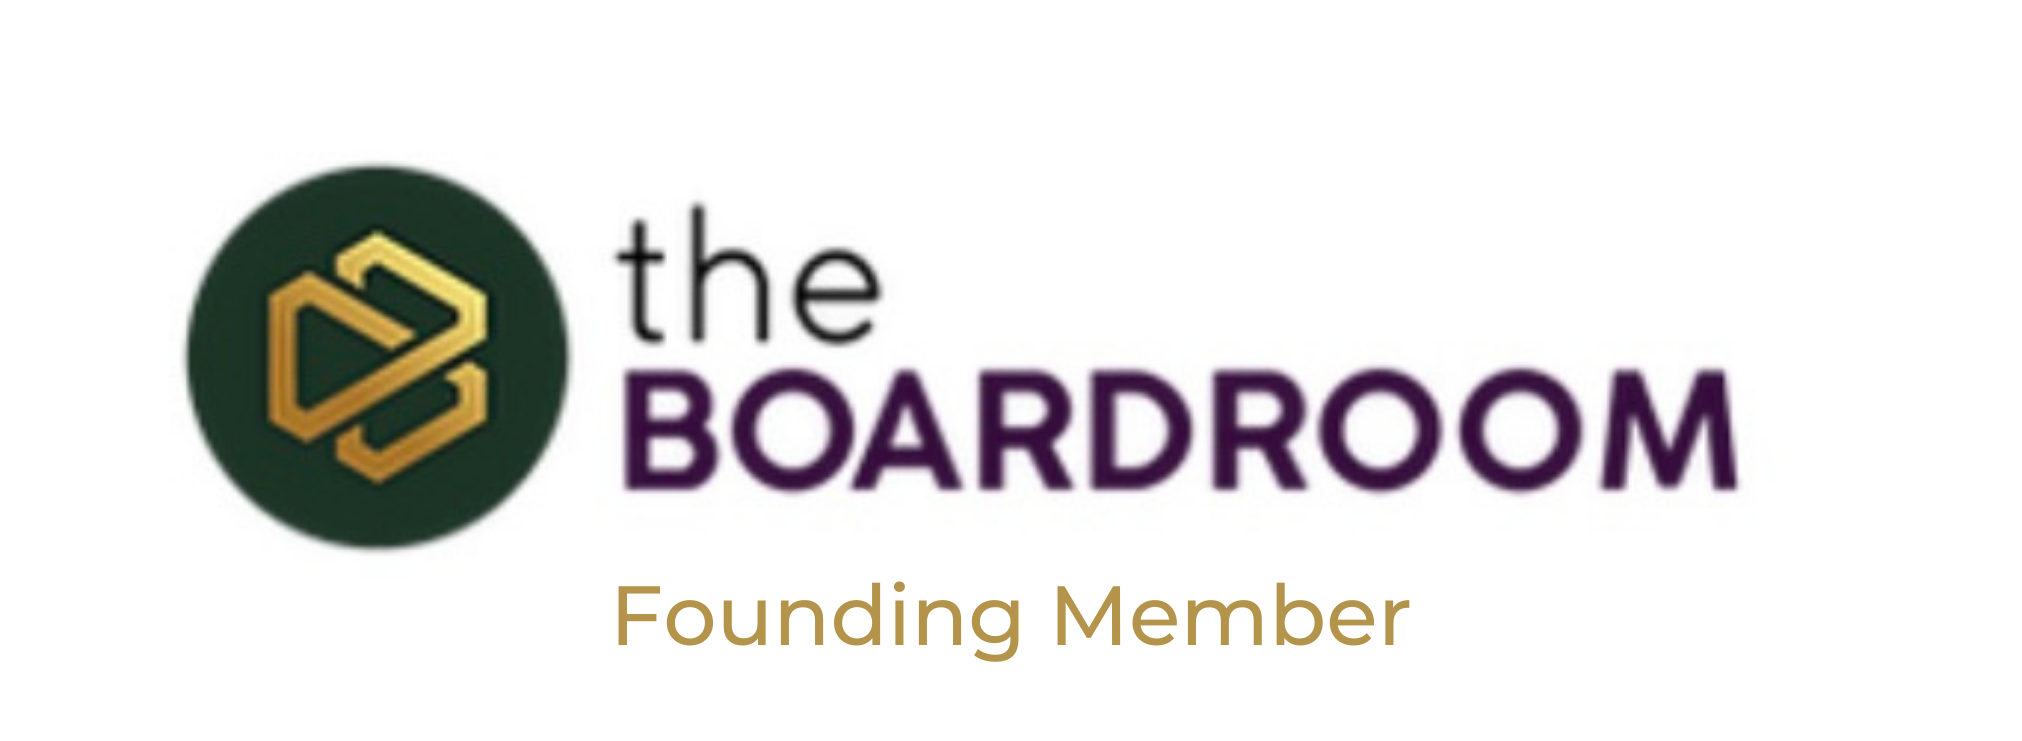 The Boardroom - Founding Member.png